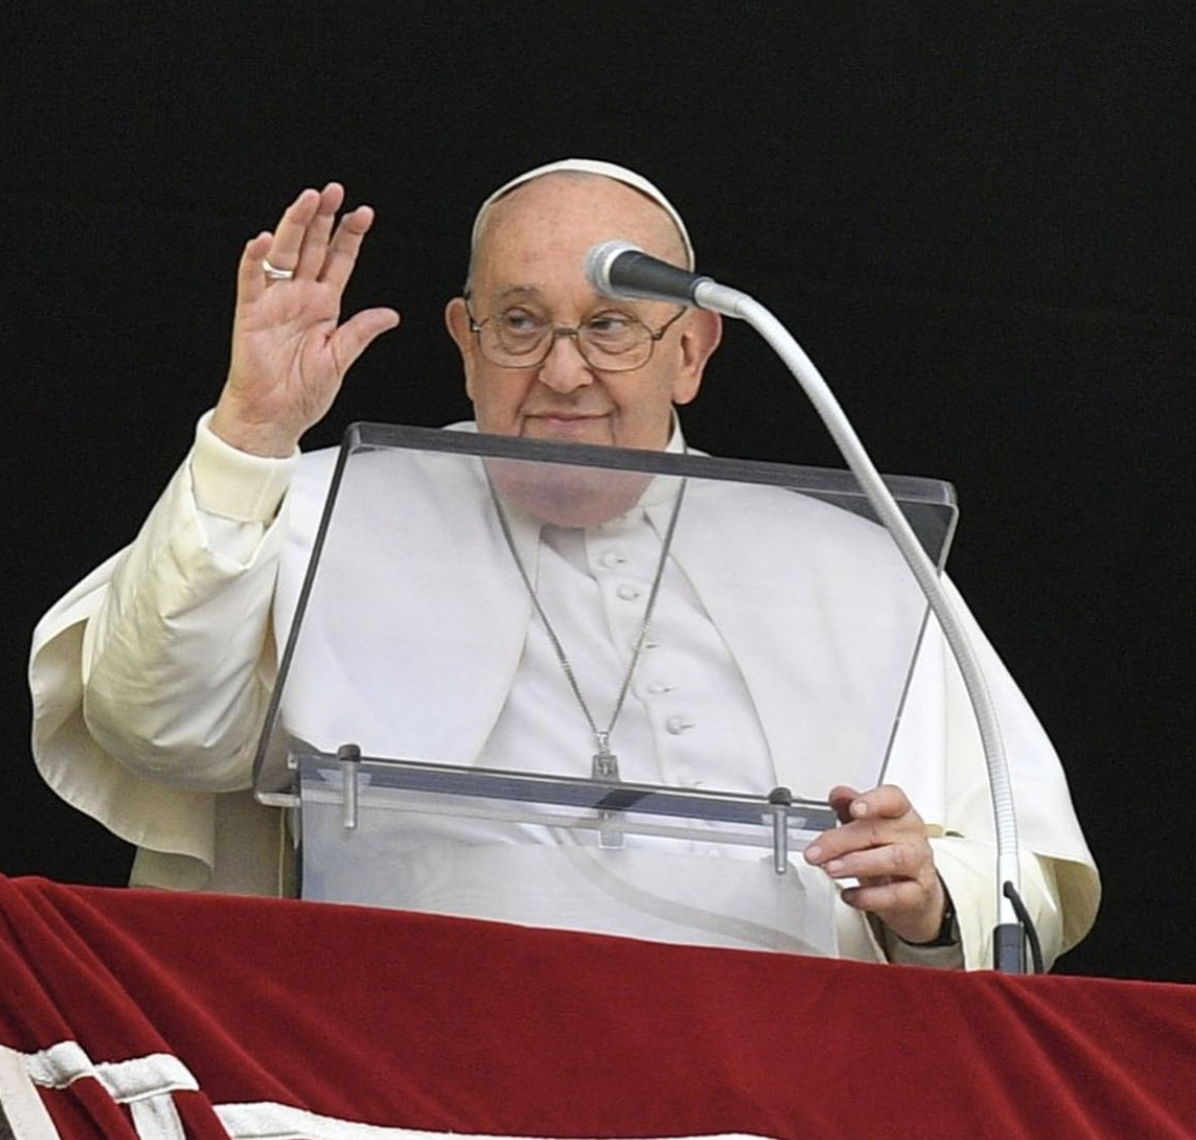 The+Pope+is+an+important+figure+in+politics.+%28Courtesy+of+instagram%2F+%40franciscus%29